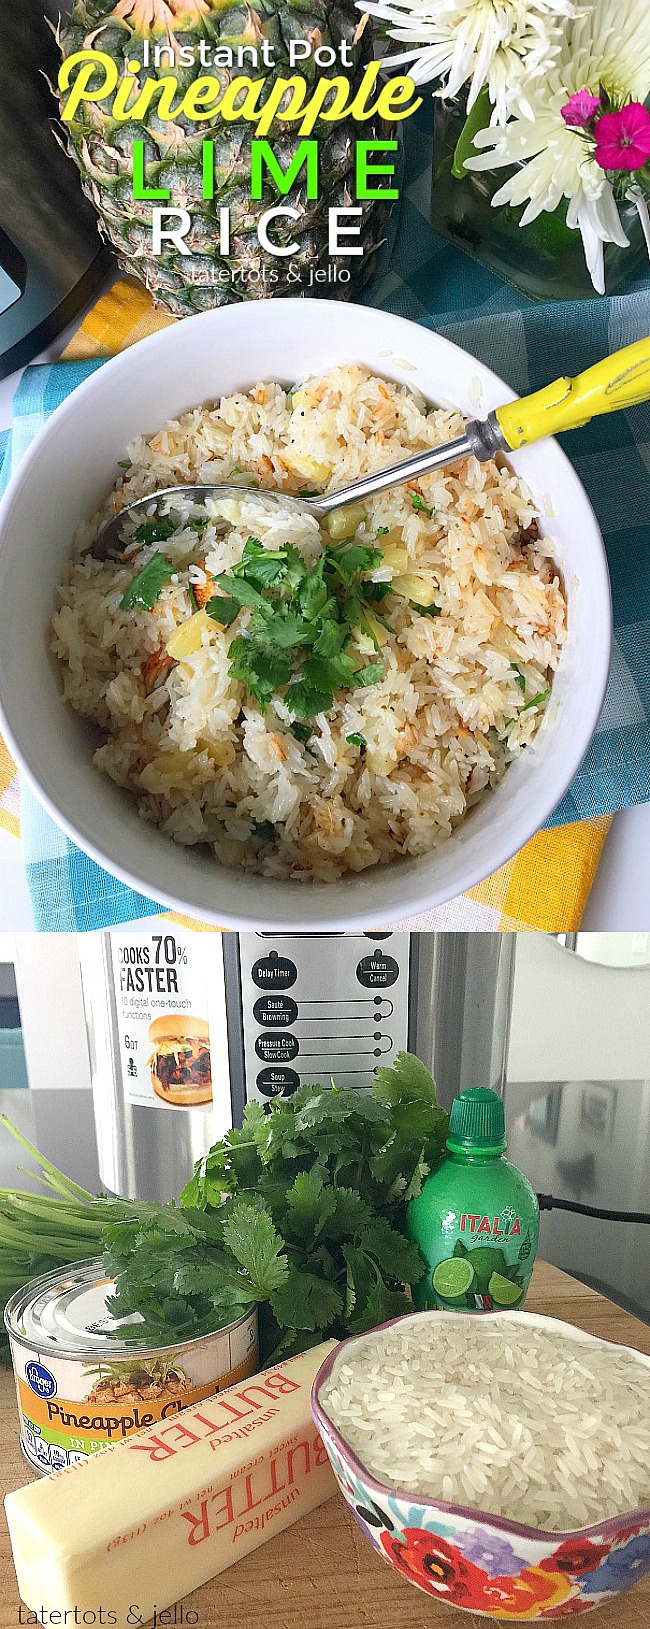 Pineapple Lime Rice is the perfect side dish this summer. The juicy tidbits of pineapple are complemented perfectly with the tart, citrus flavor of limes. And you can whip this up in 8 minutes in your pressure cooker! 